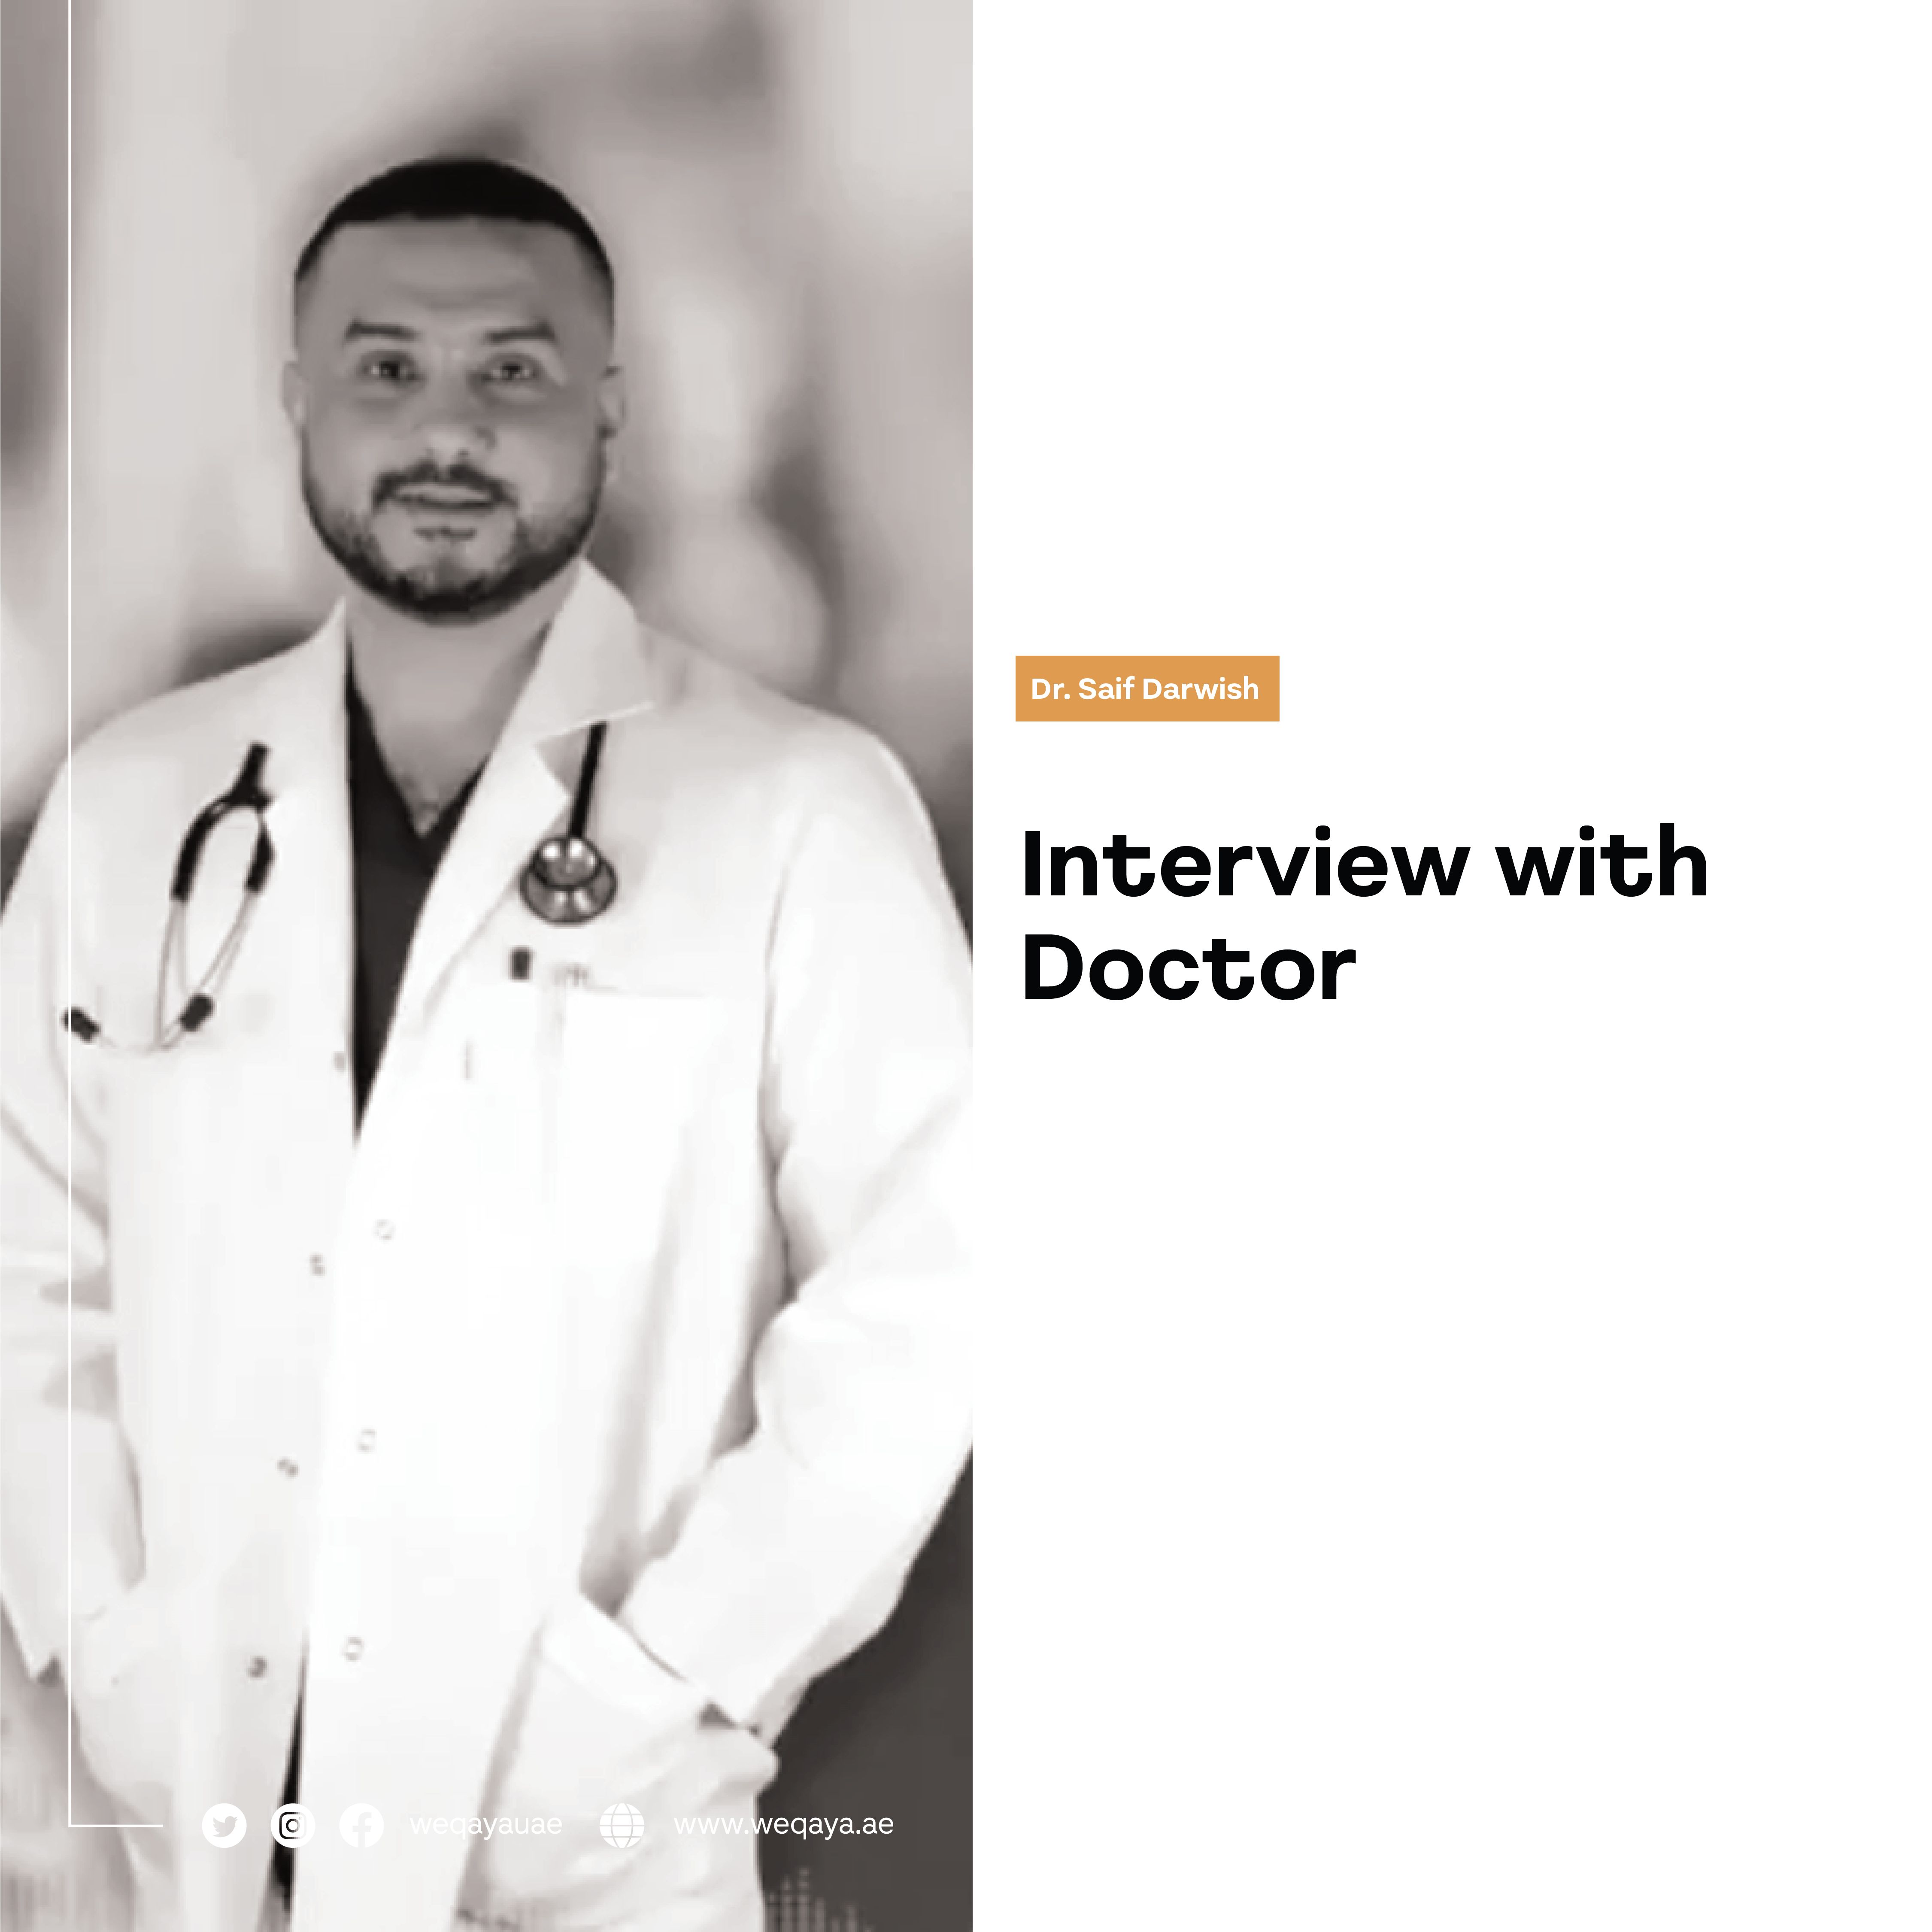 Video 2 Interview With Doctor